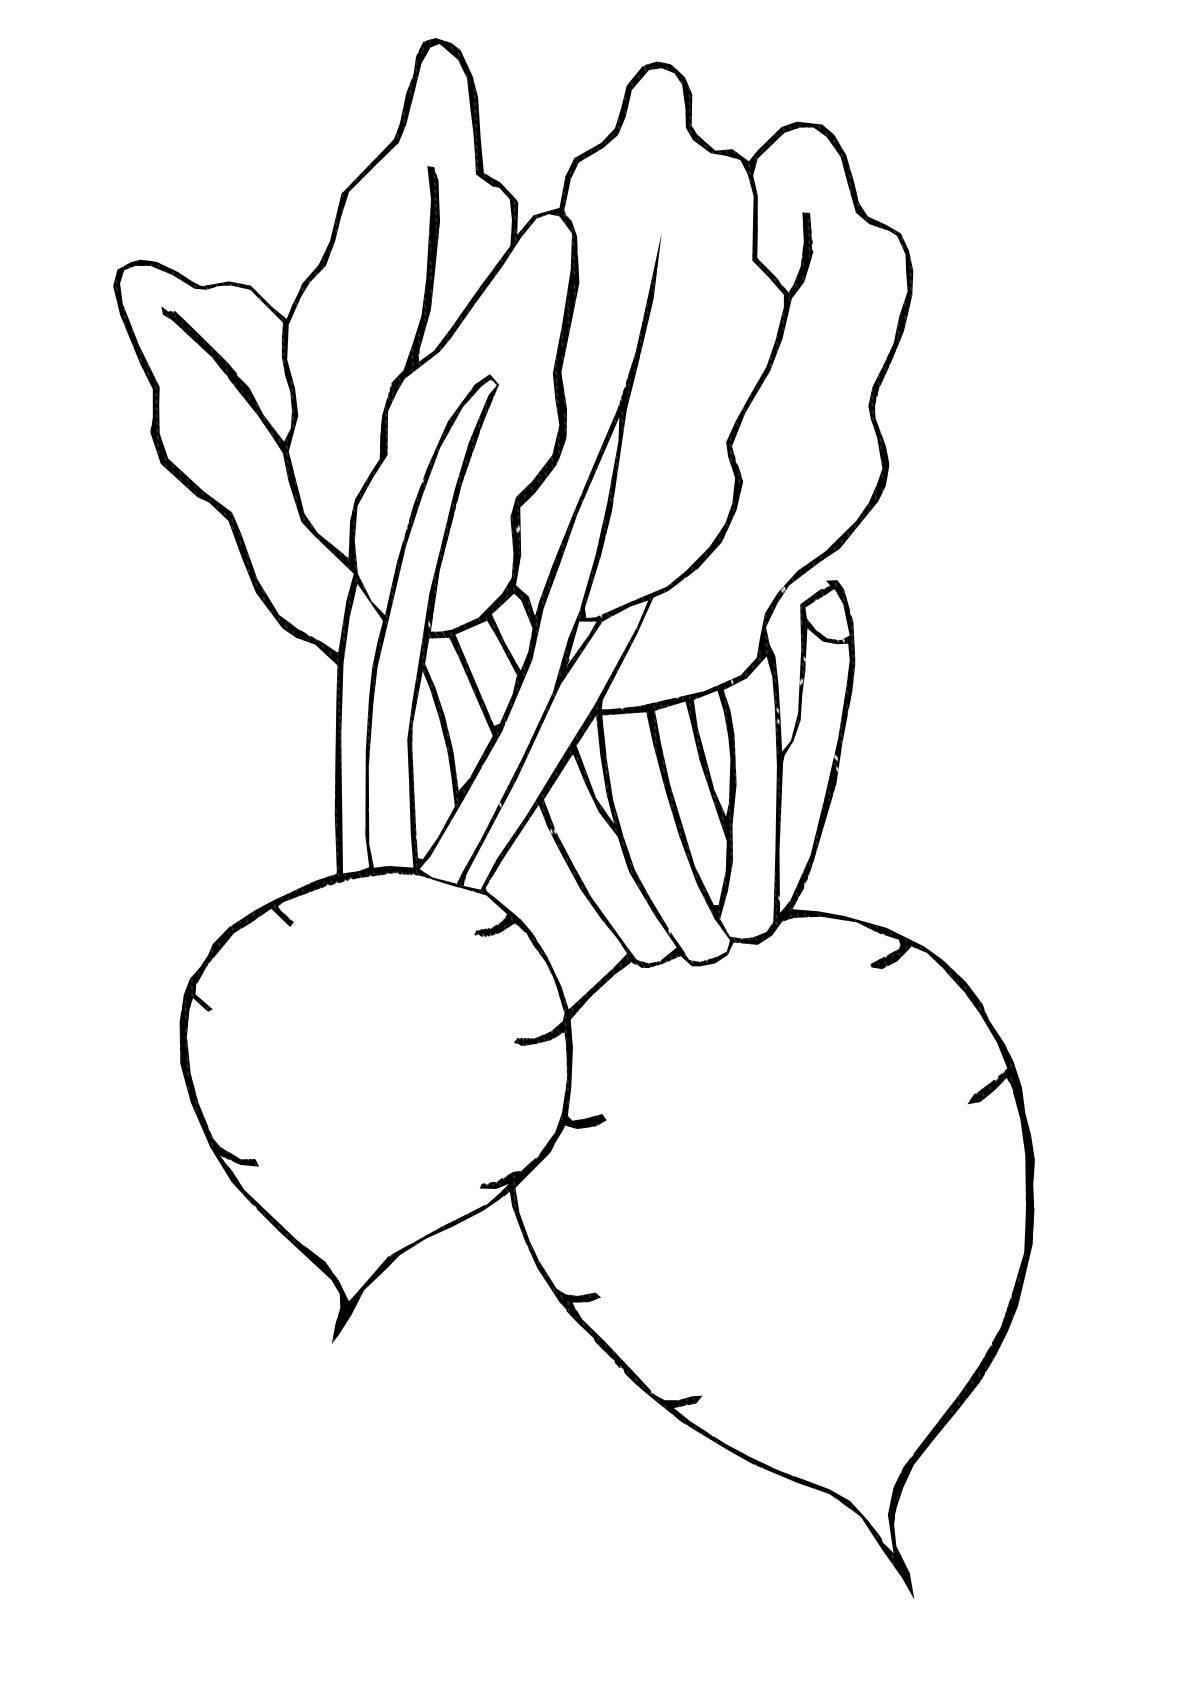 Extraordinary beetroot coloring book for kids